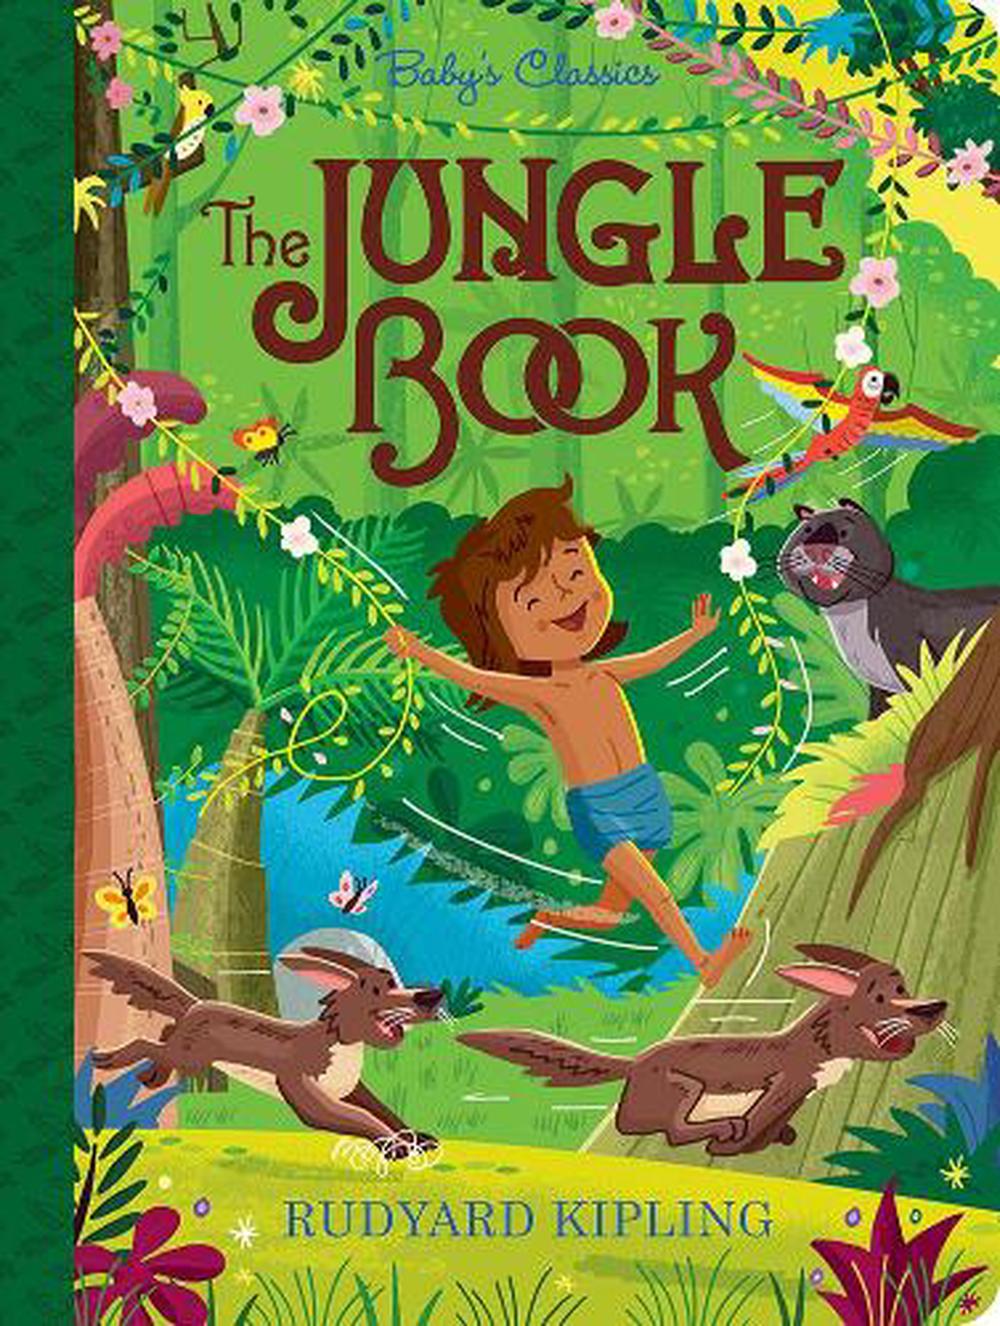 download the new The Jungle Book